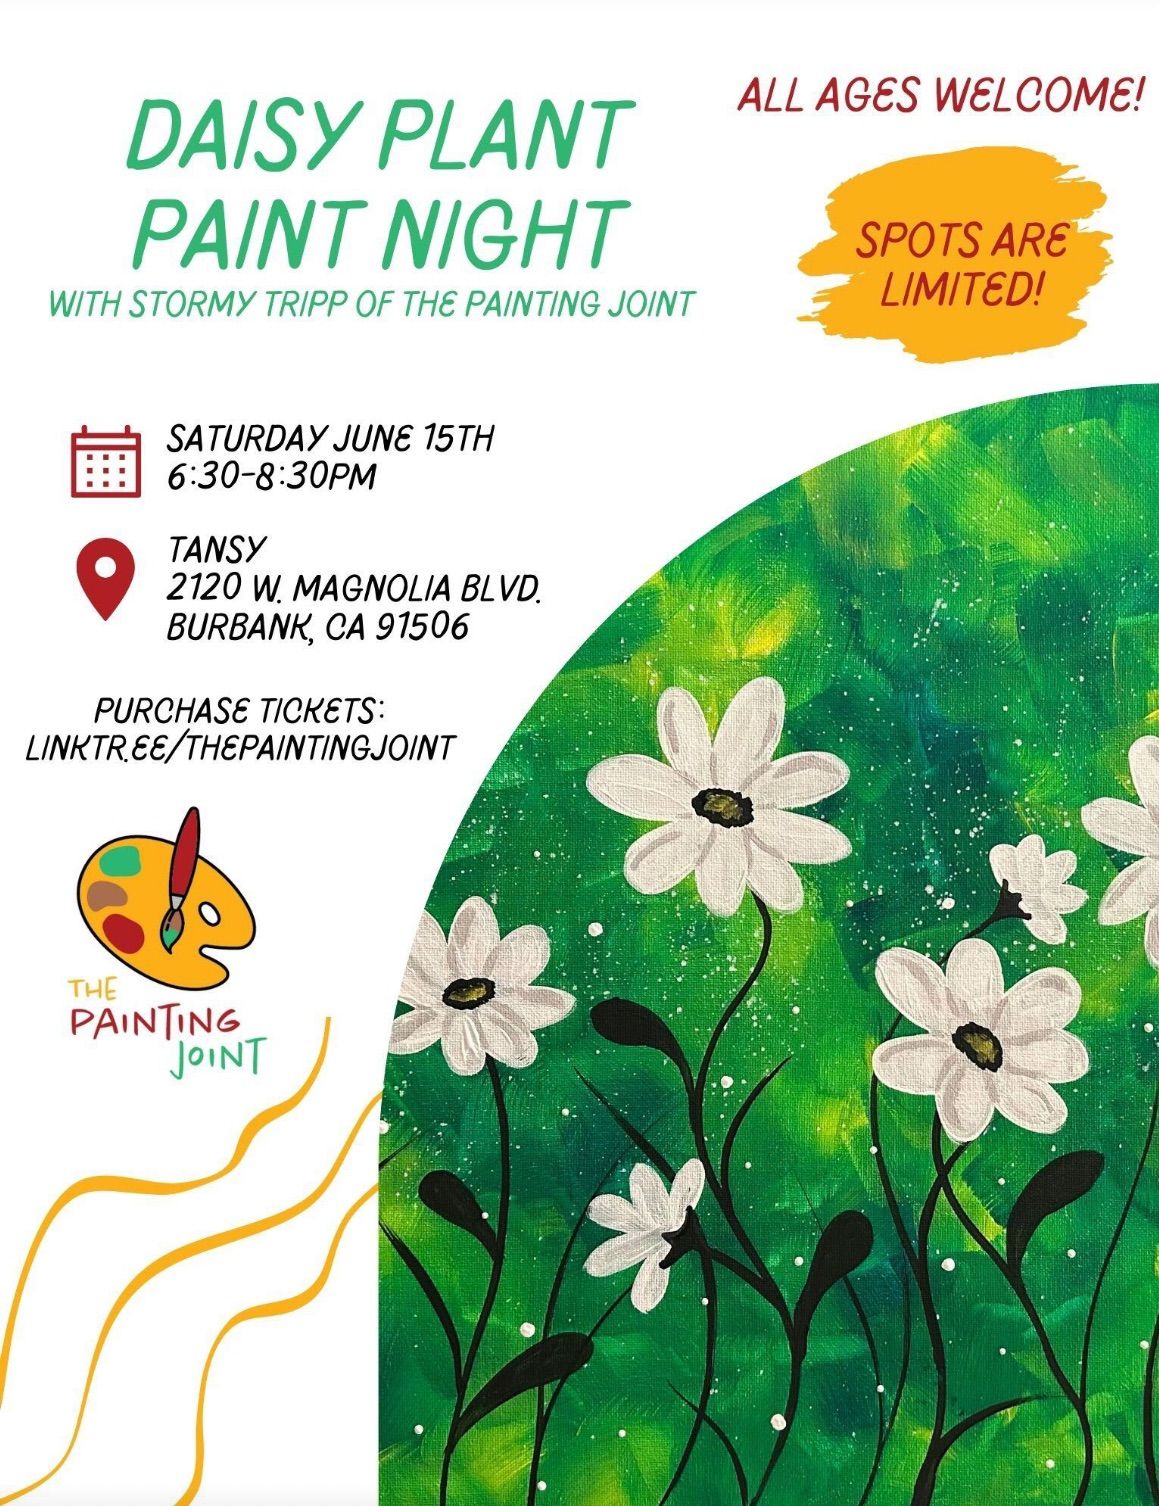 Daisy Plant Paint Night - All Ages Welcome!